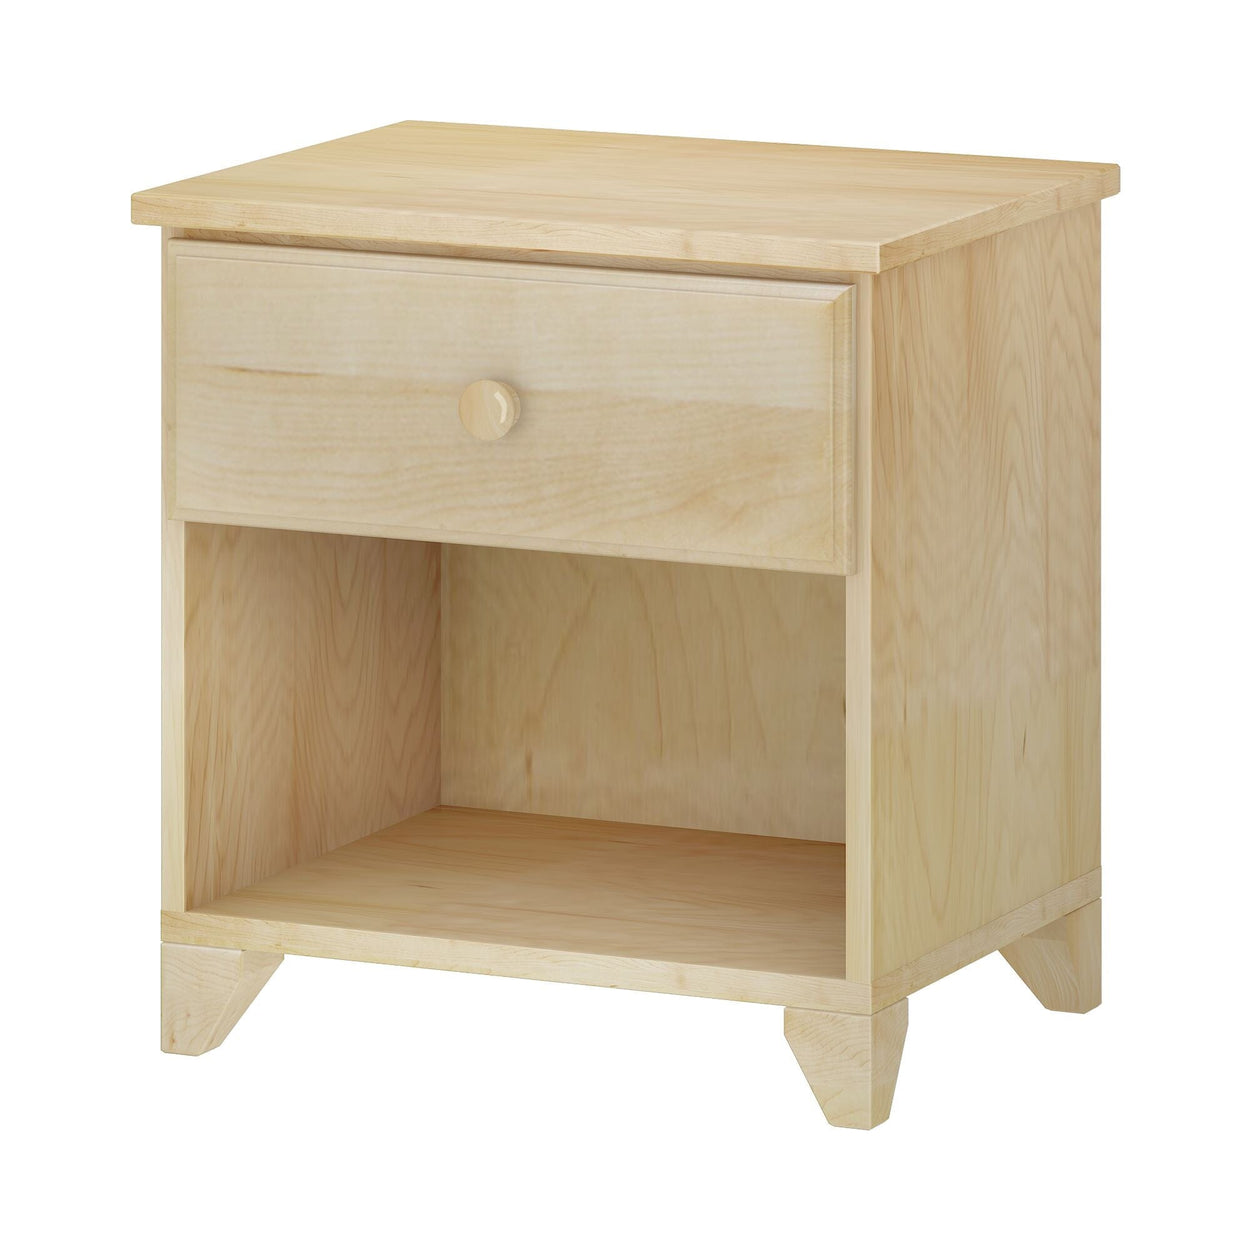 180011-001 : Furniture Nightstand with 1 Drawer, Natural